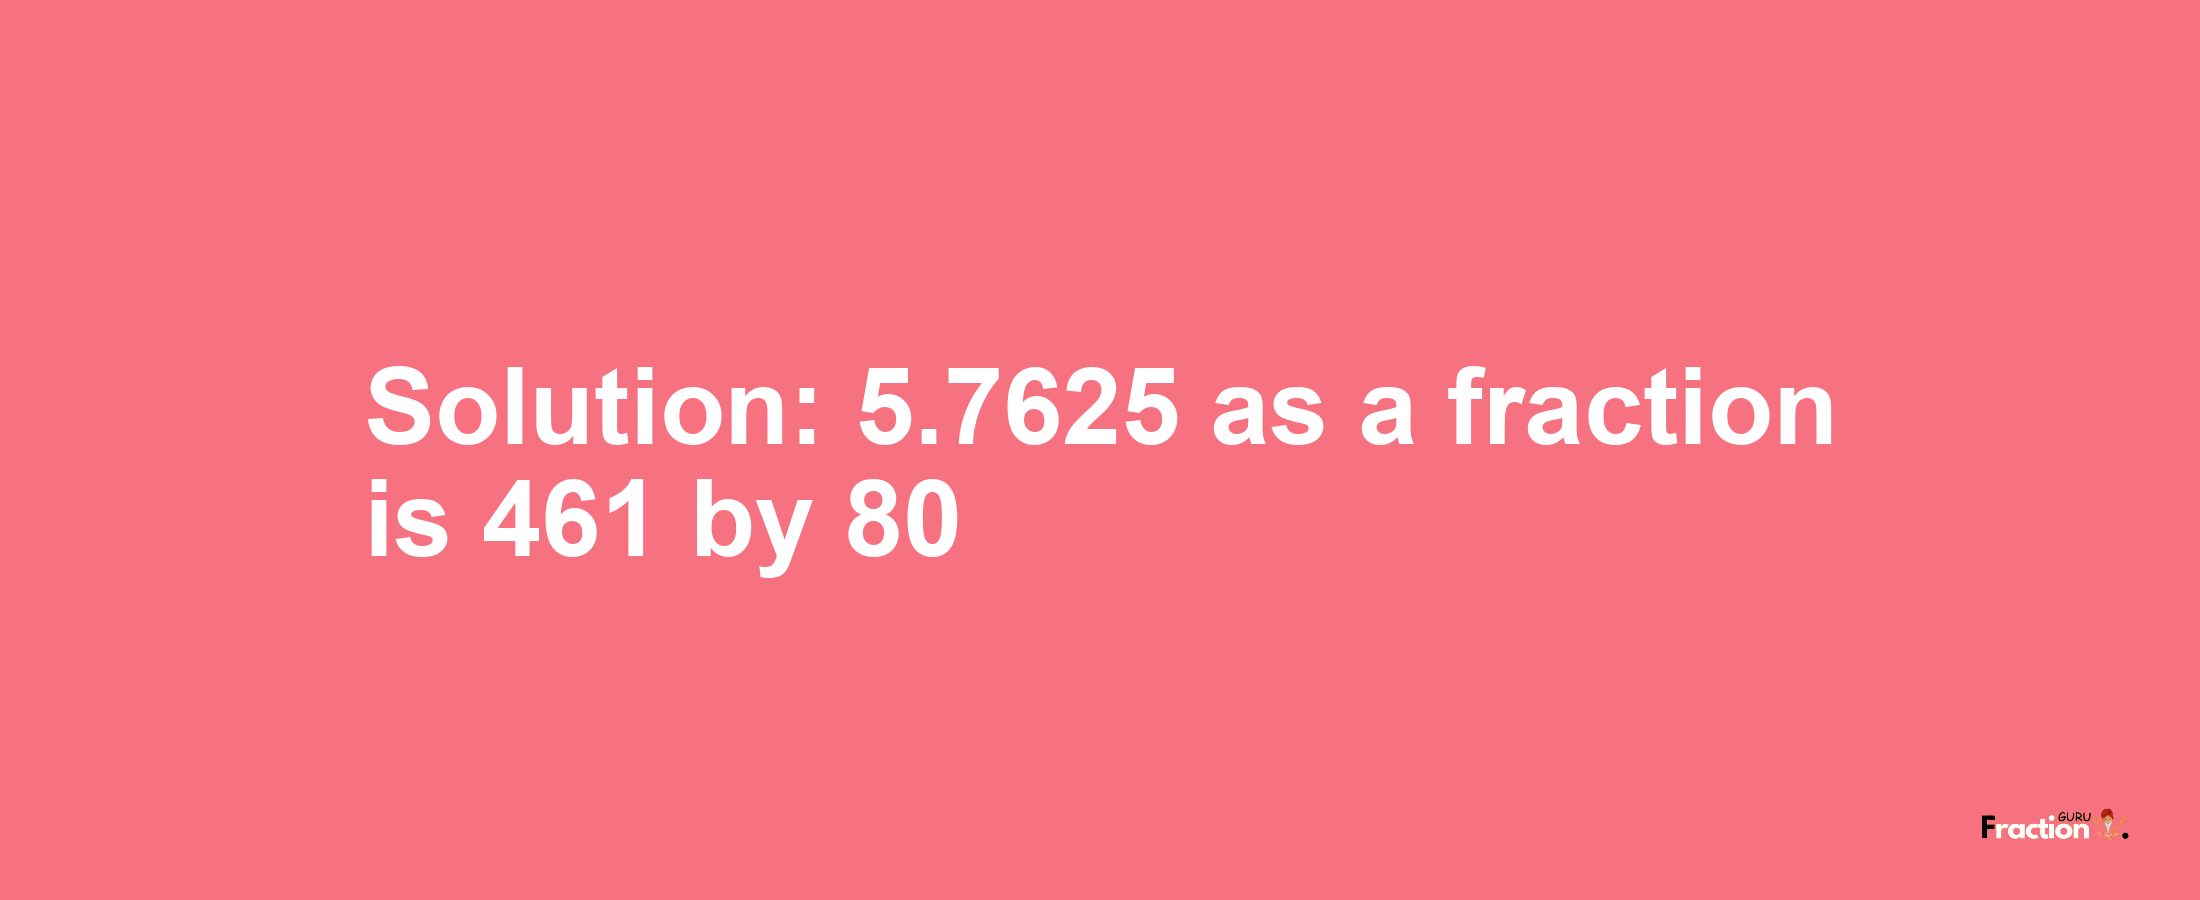 Solution:5.7625 as a fraction is 461/80